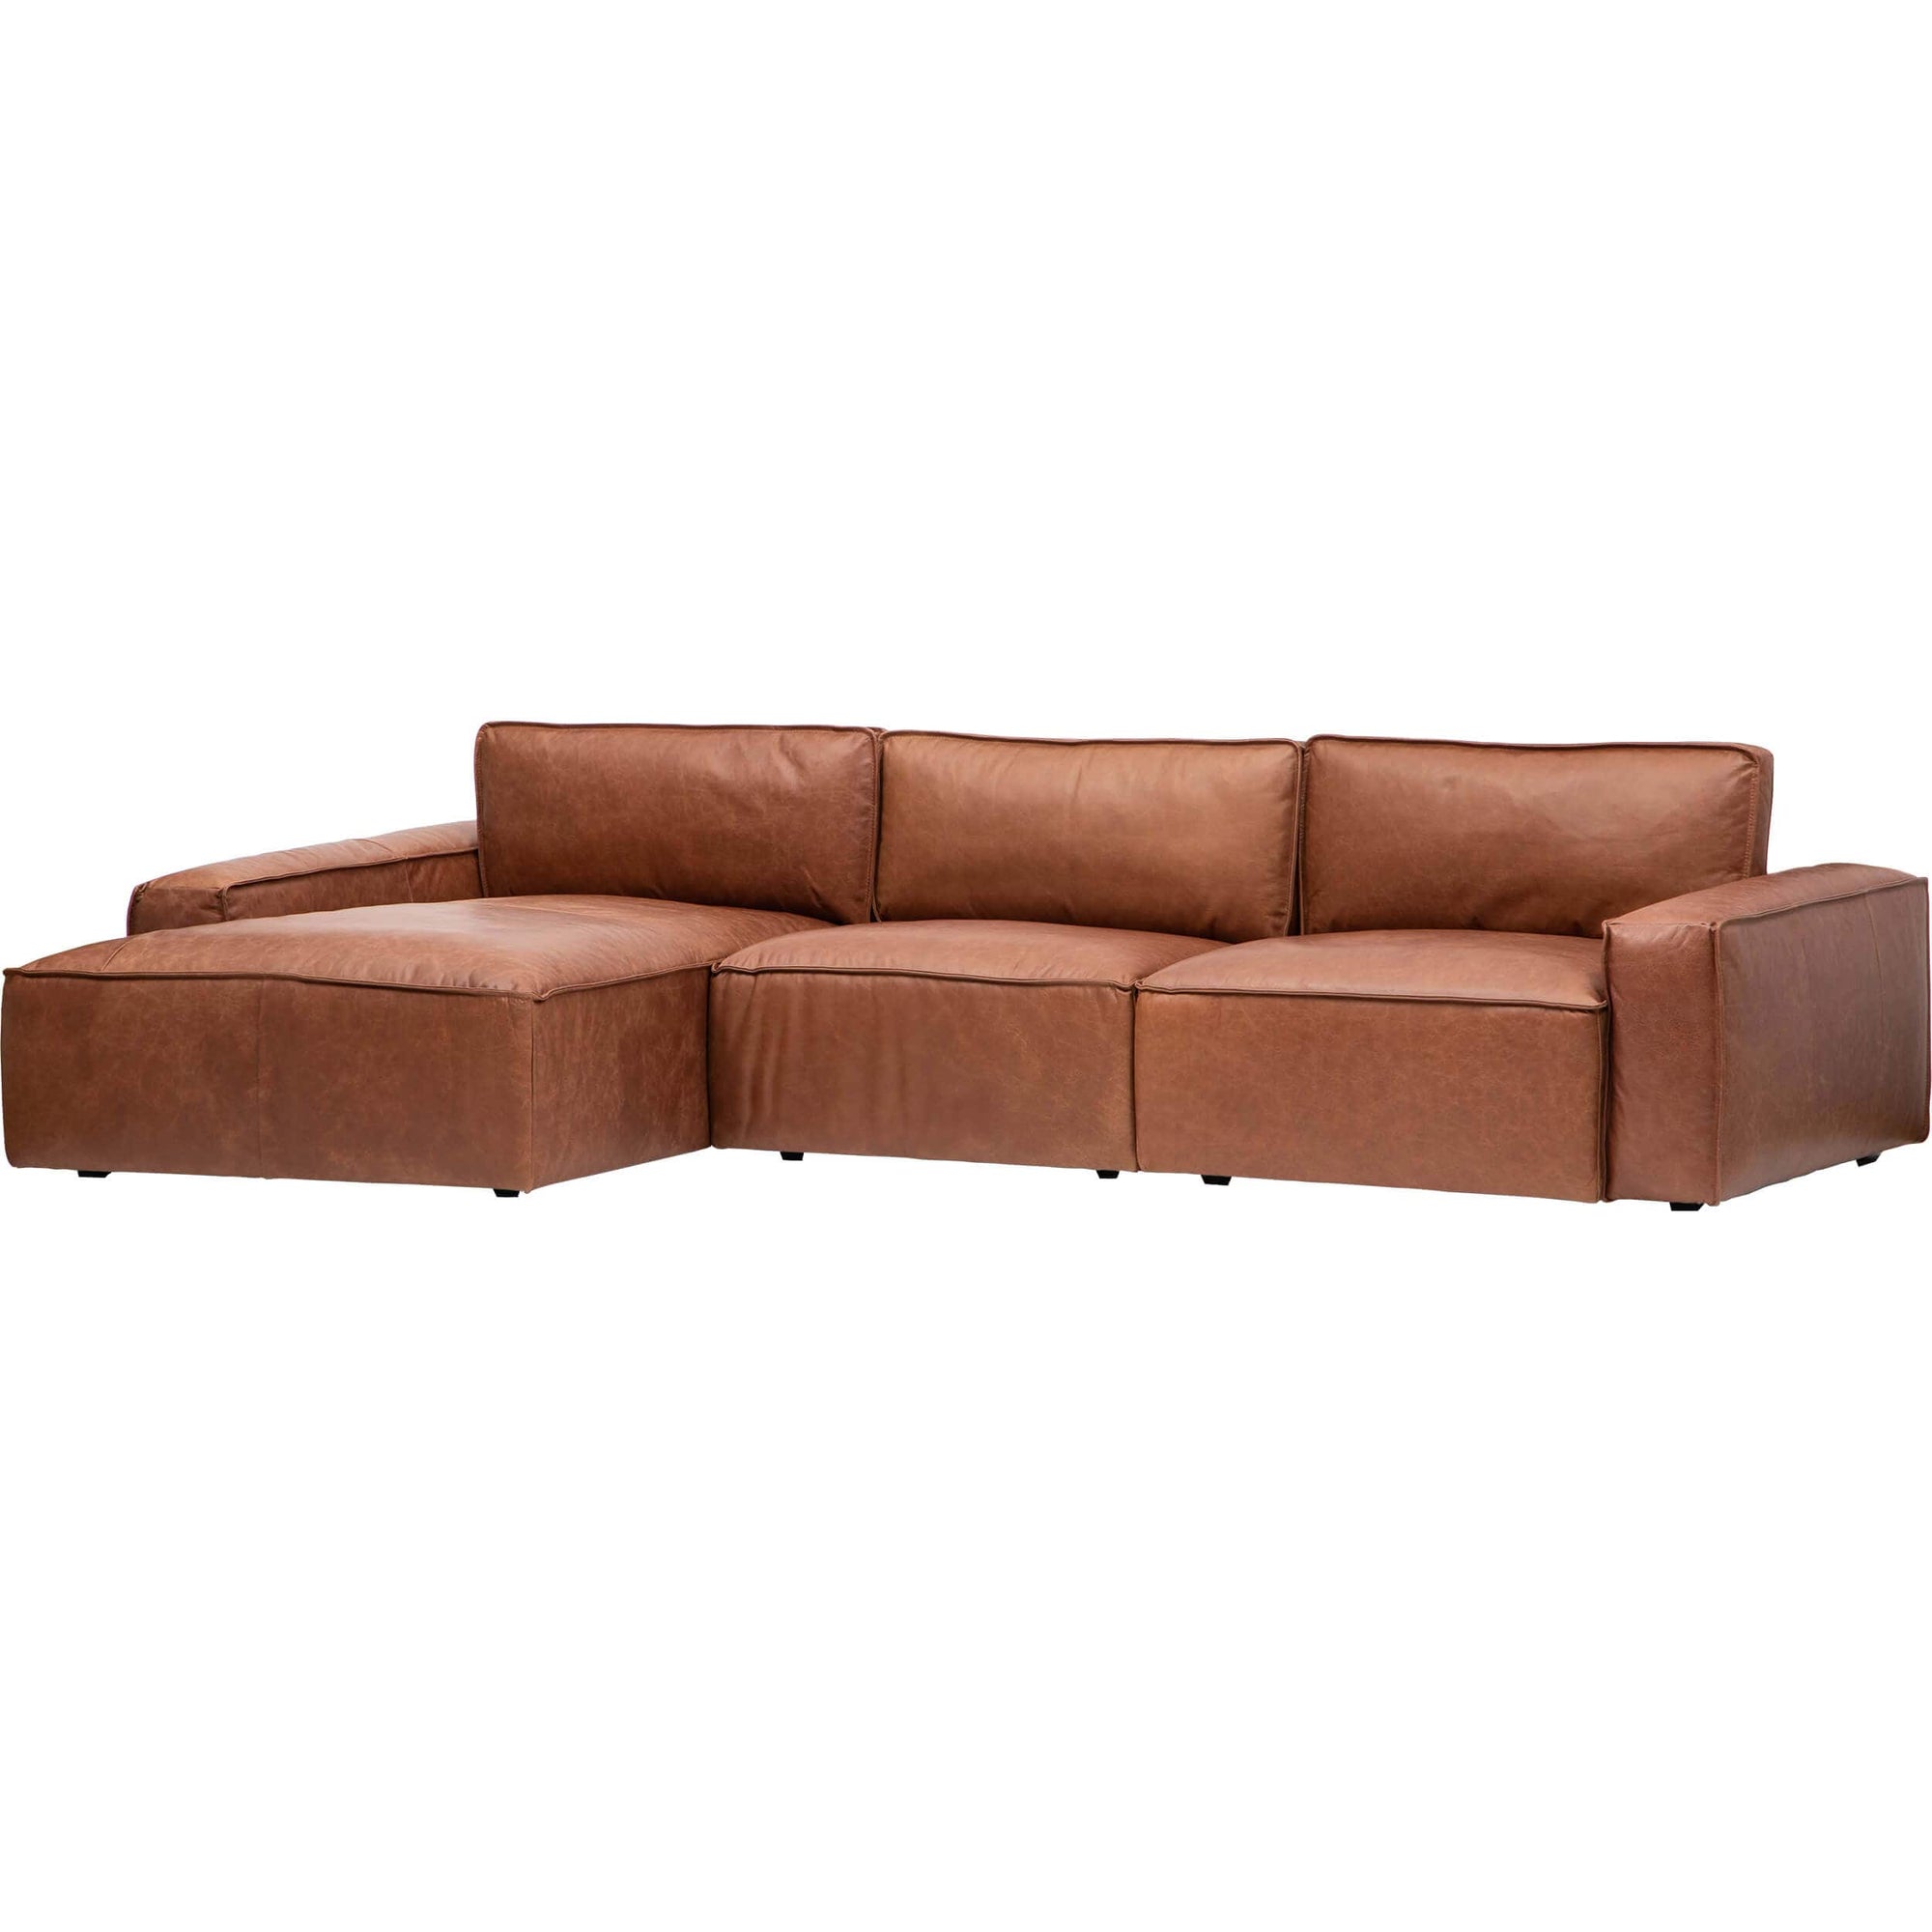 Zion Leather Carmel Sectional, Home Marseille High – Fashion